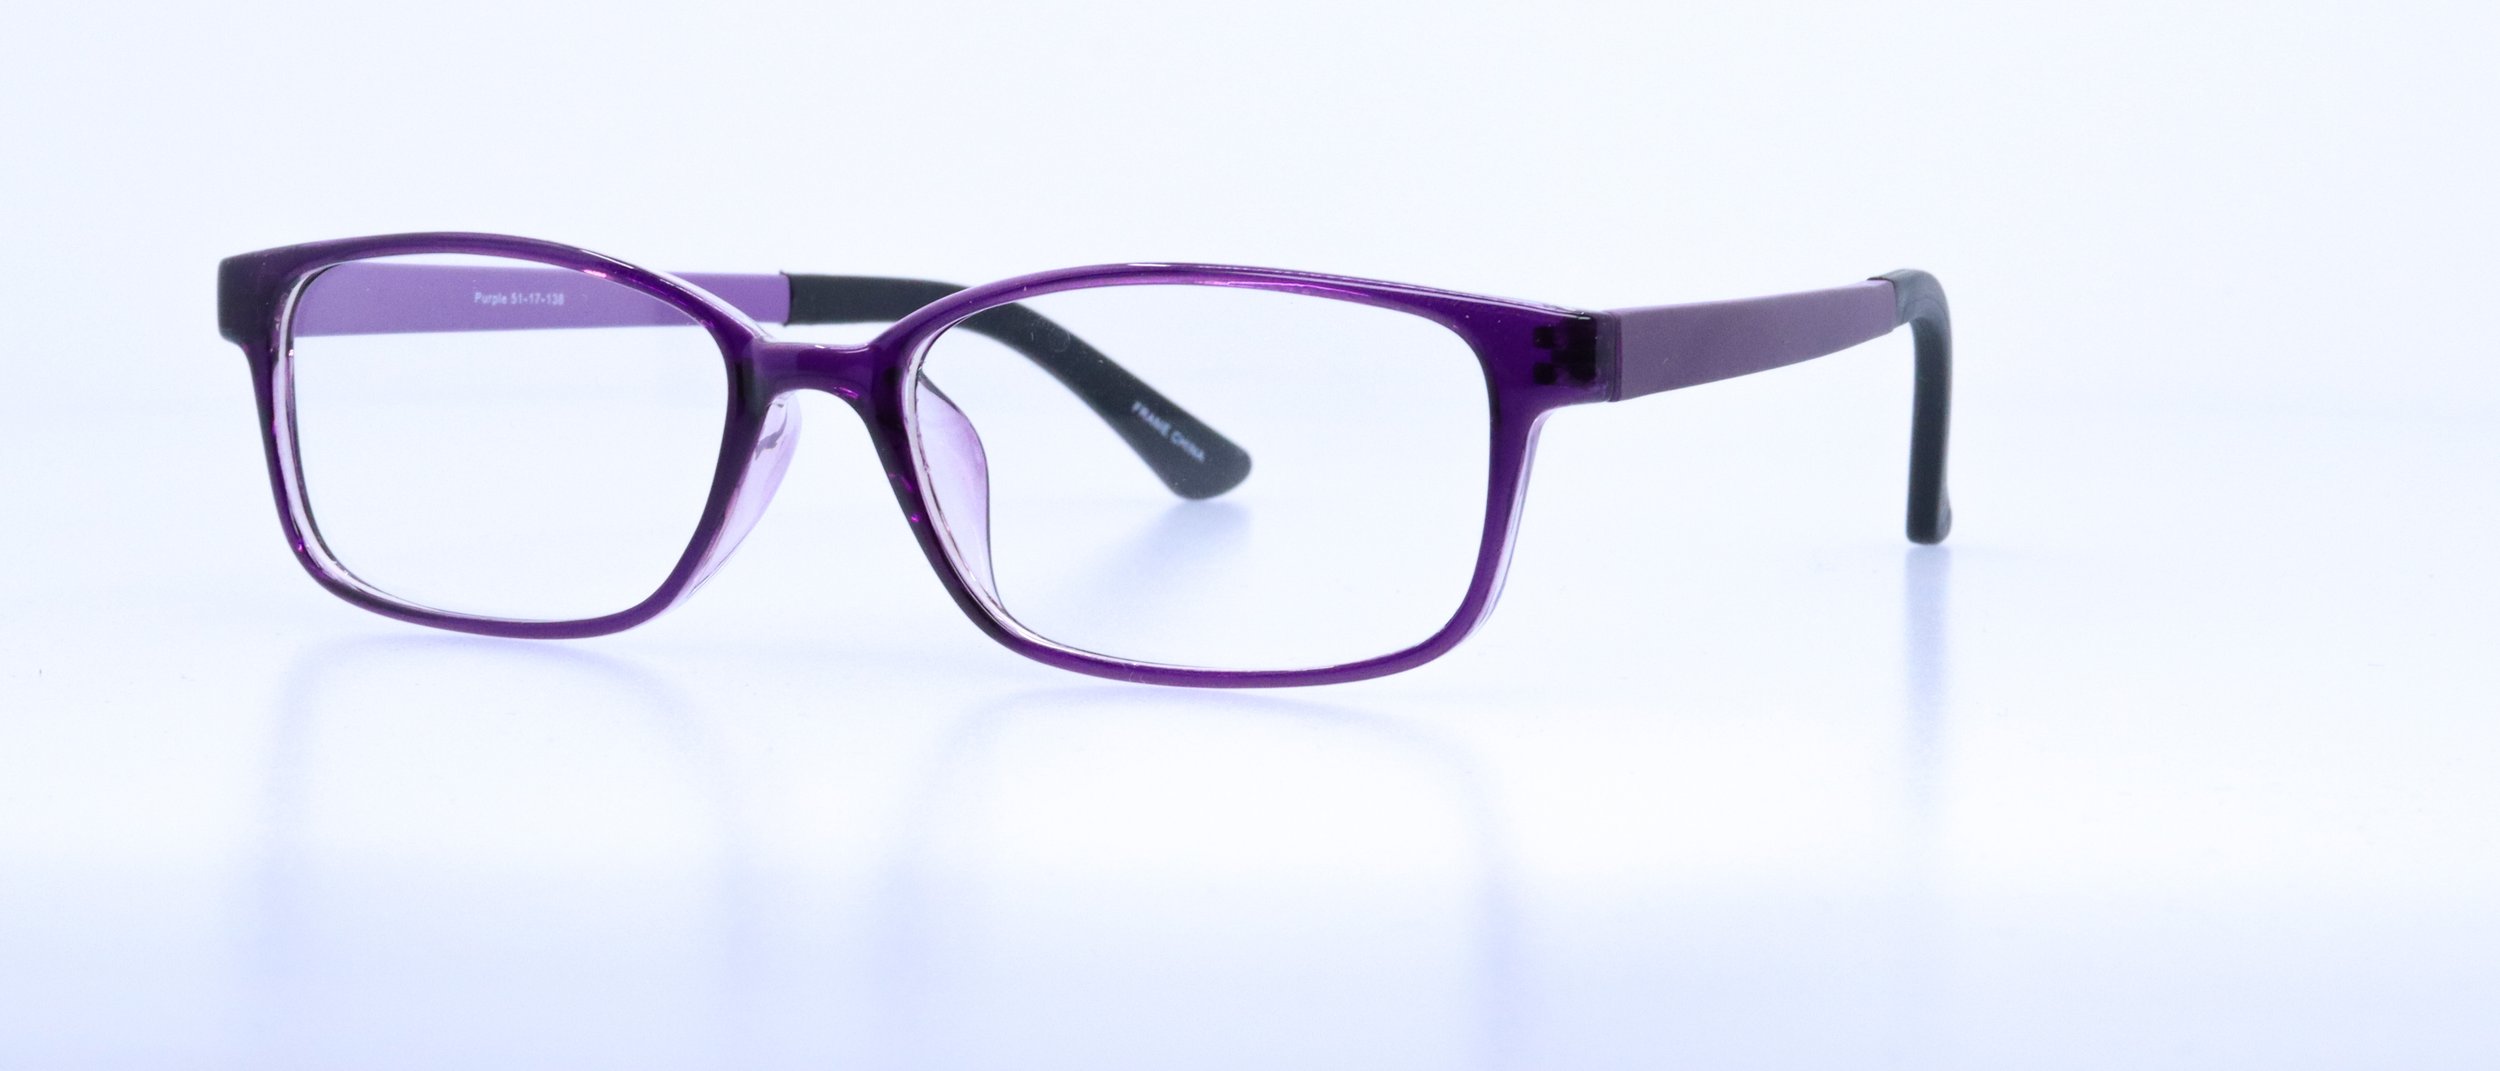  BV900: 51-17-138, Available in Brown or Purple 